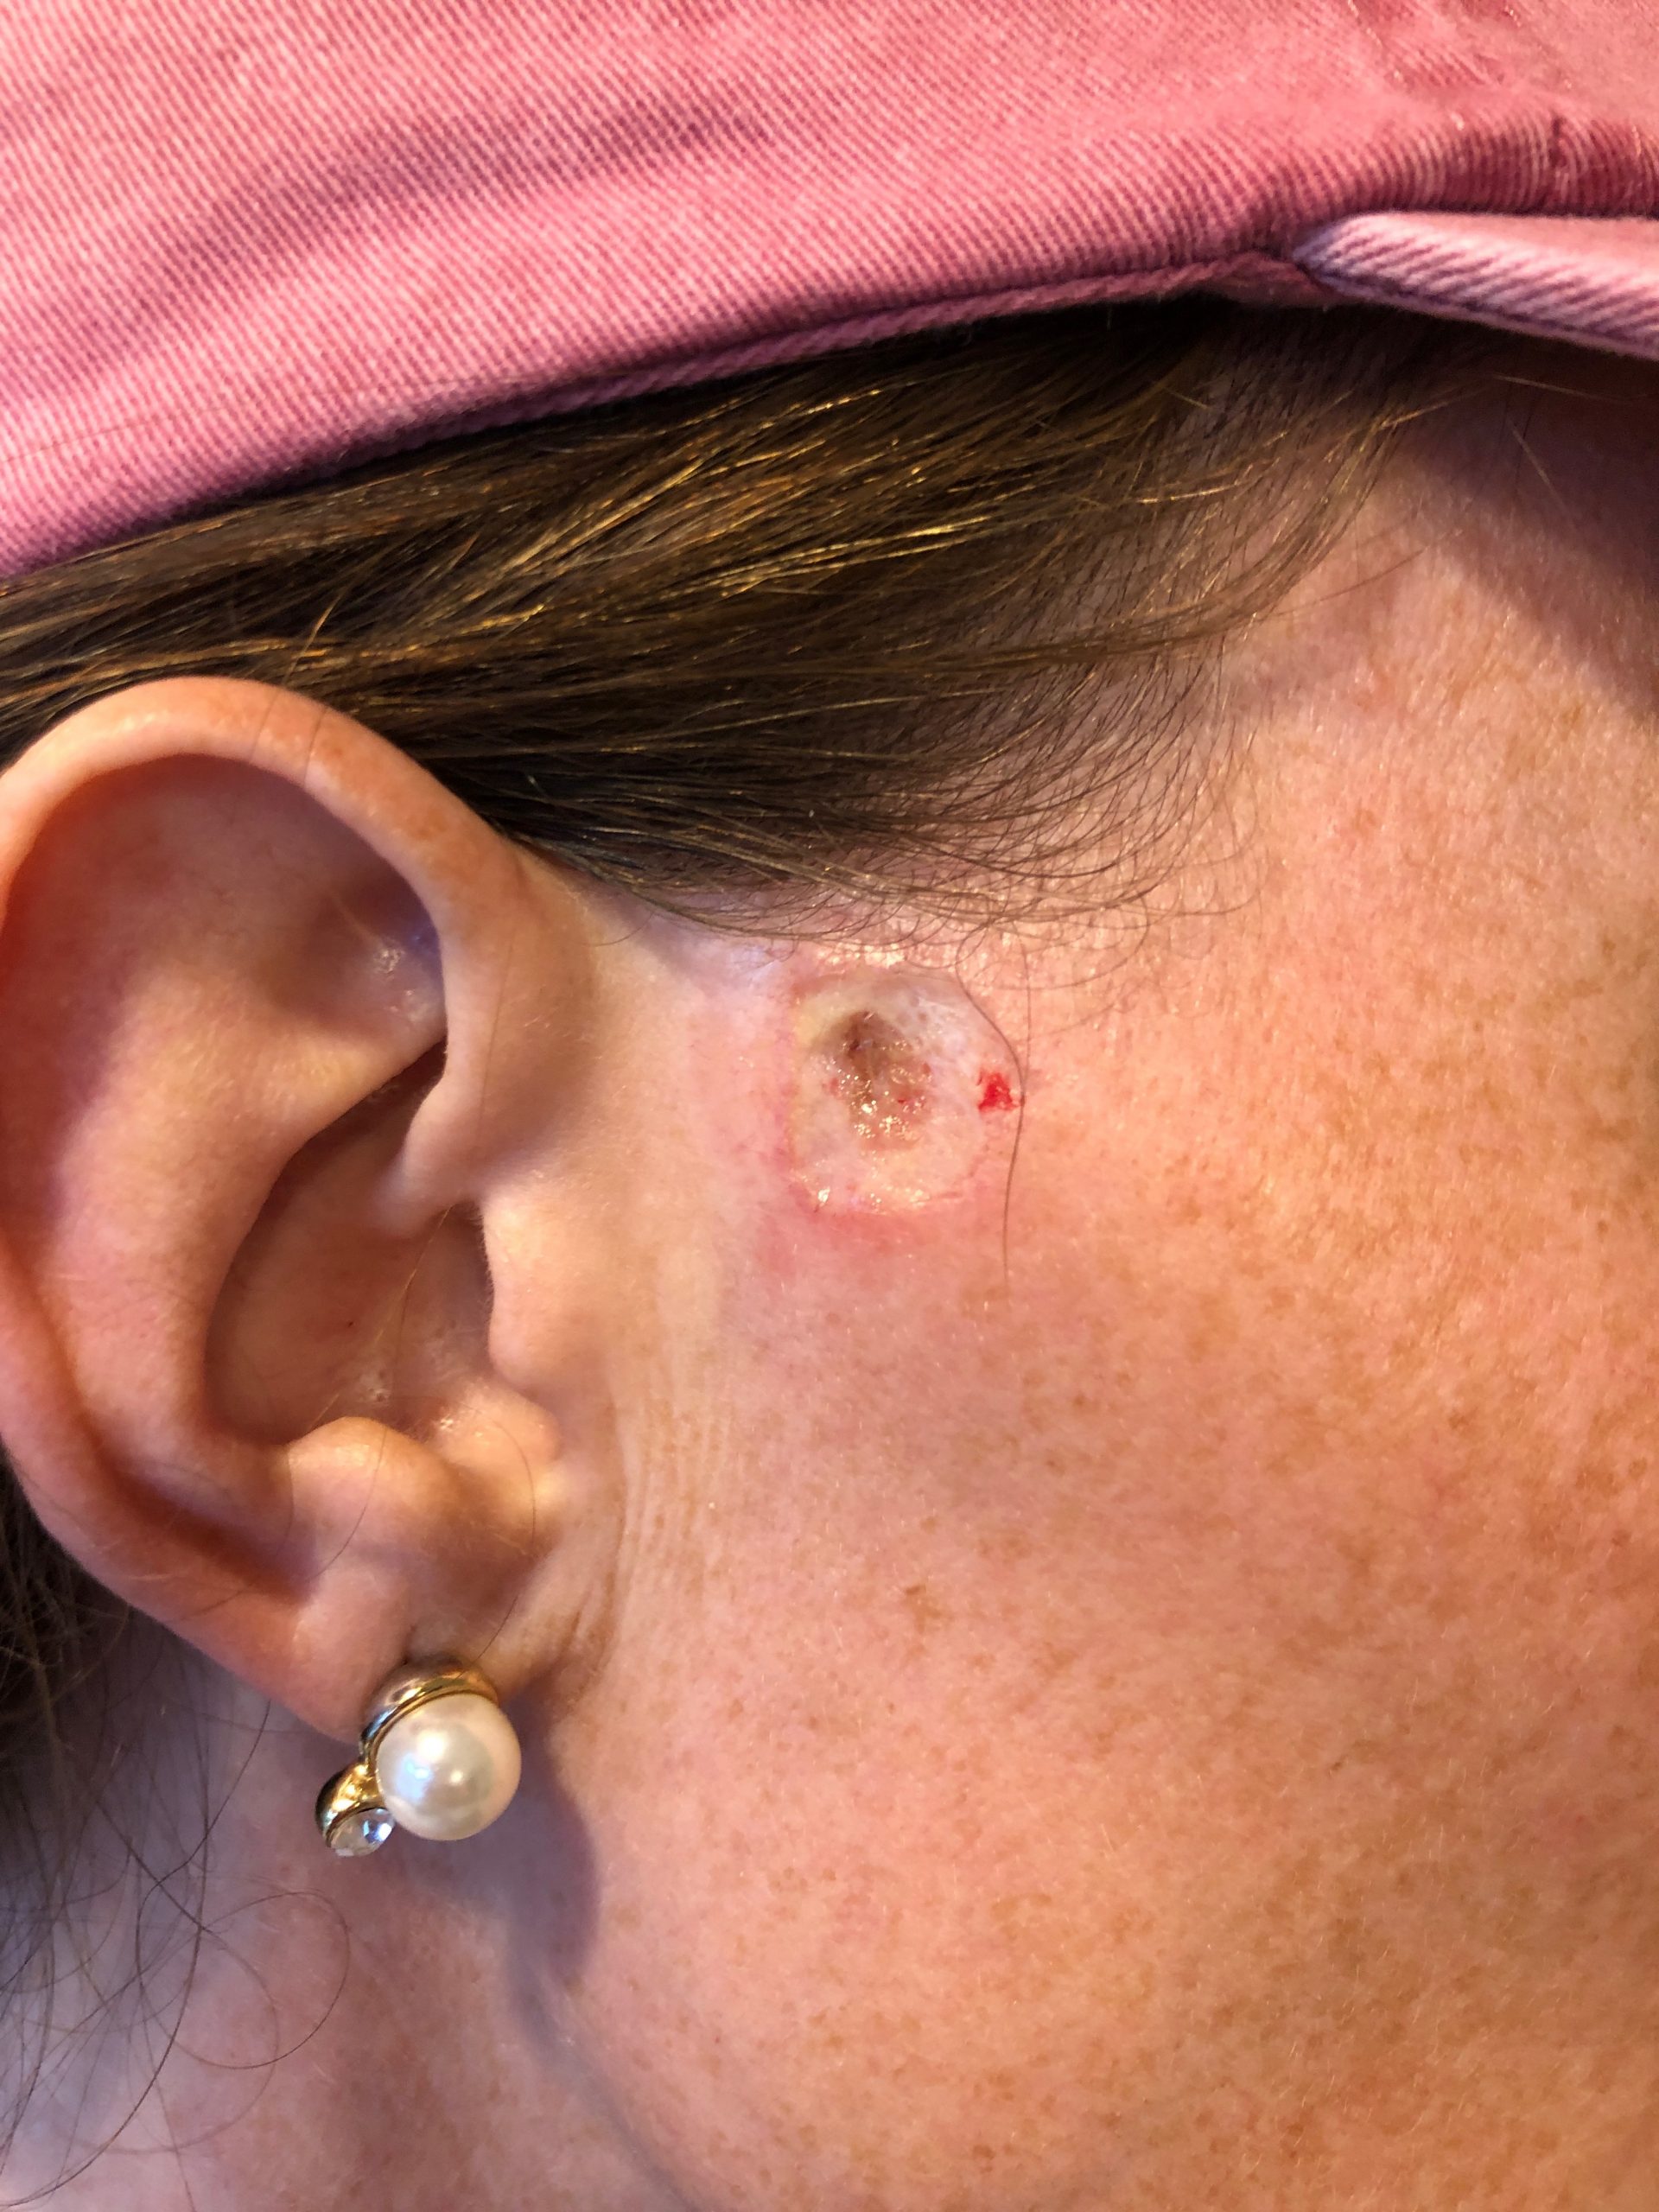 woman after skin cancer biopsy for basal cell carcinoma